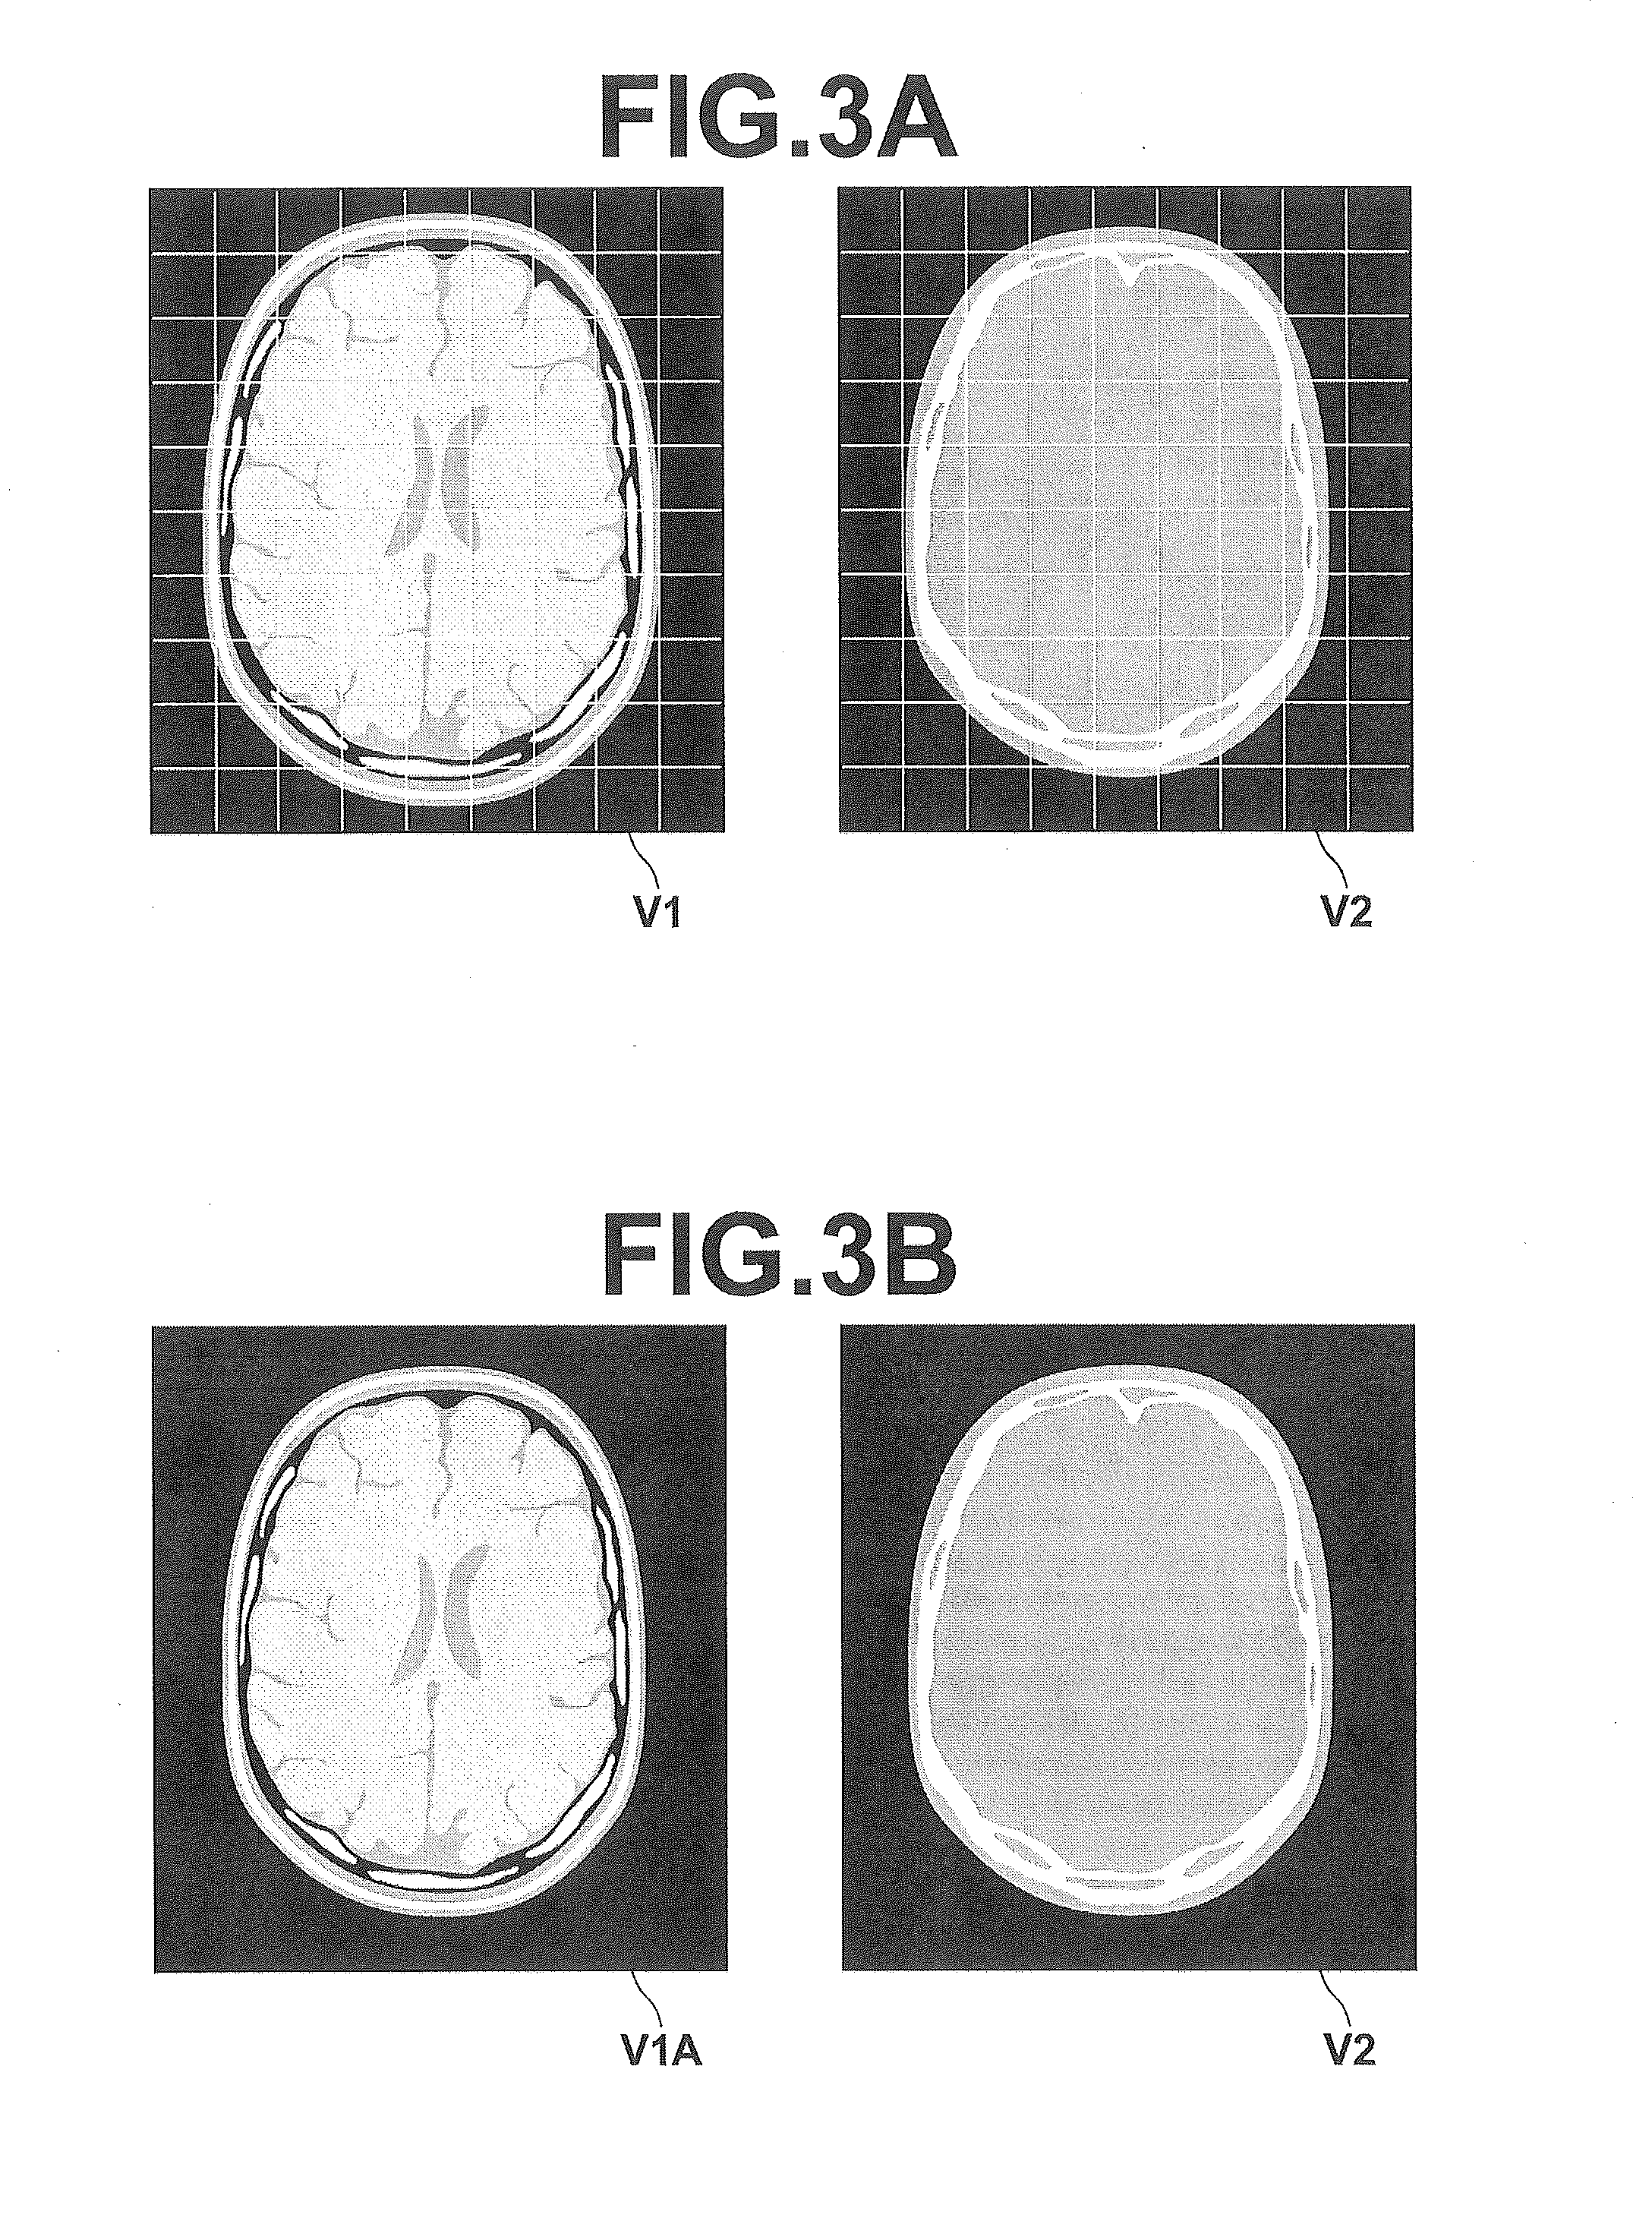 Image processing device, image processing method and image processing program